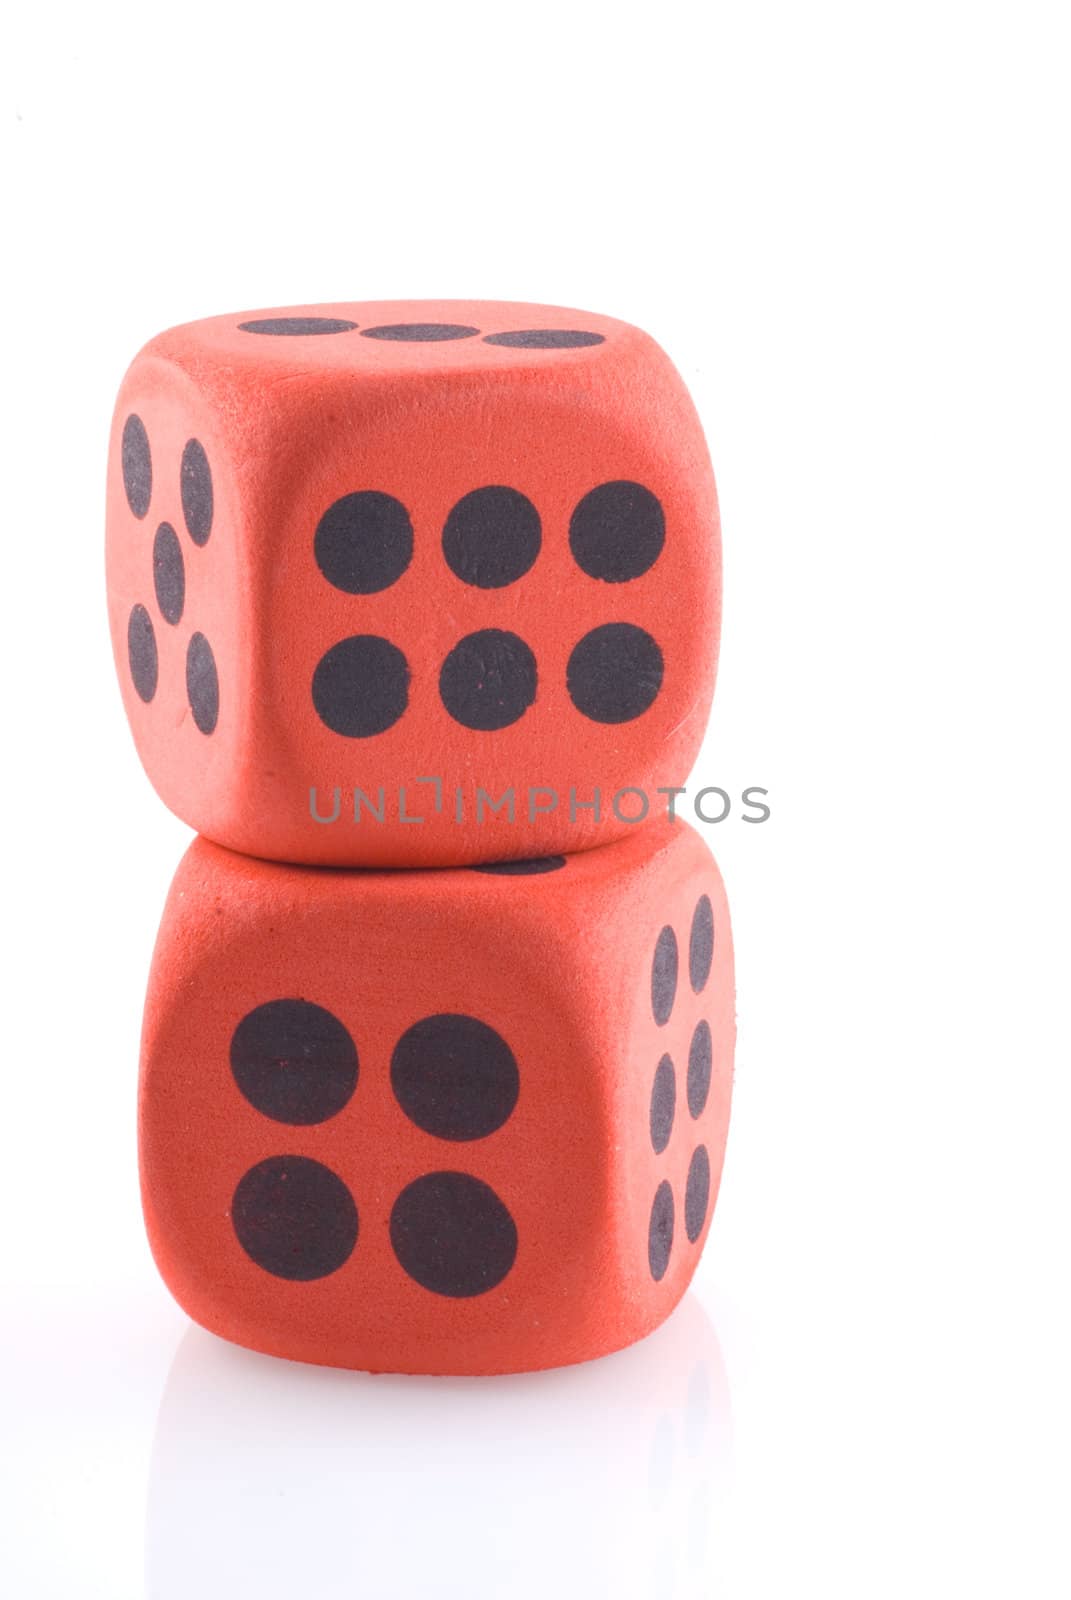 Close up of two dice on a white background.